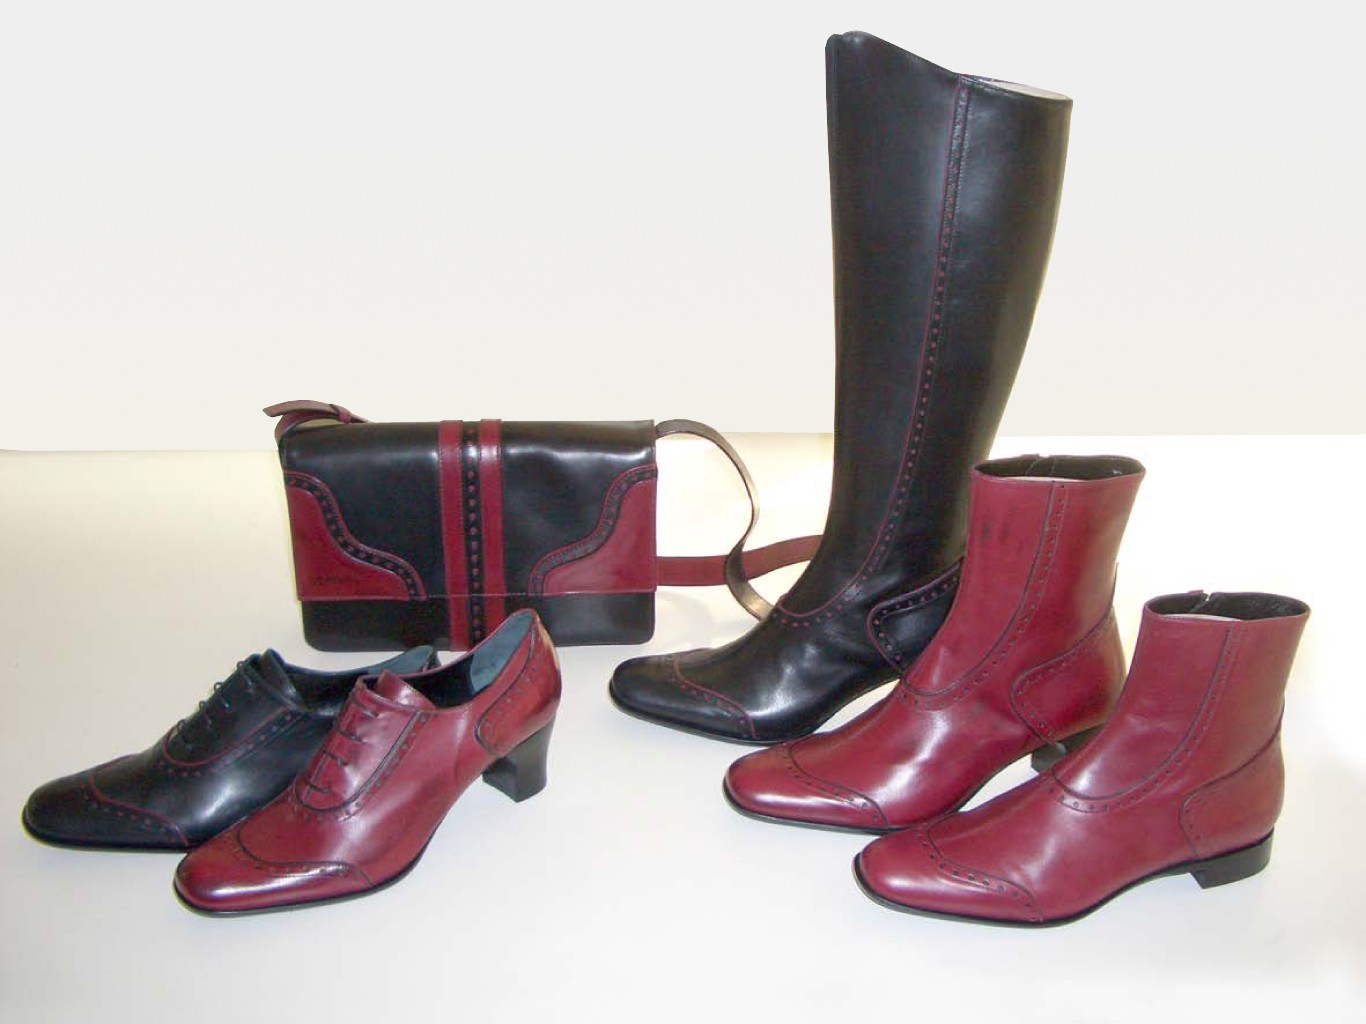 shoes & accessories | LLOYD SHOES | Group business